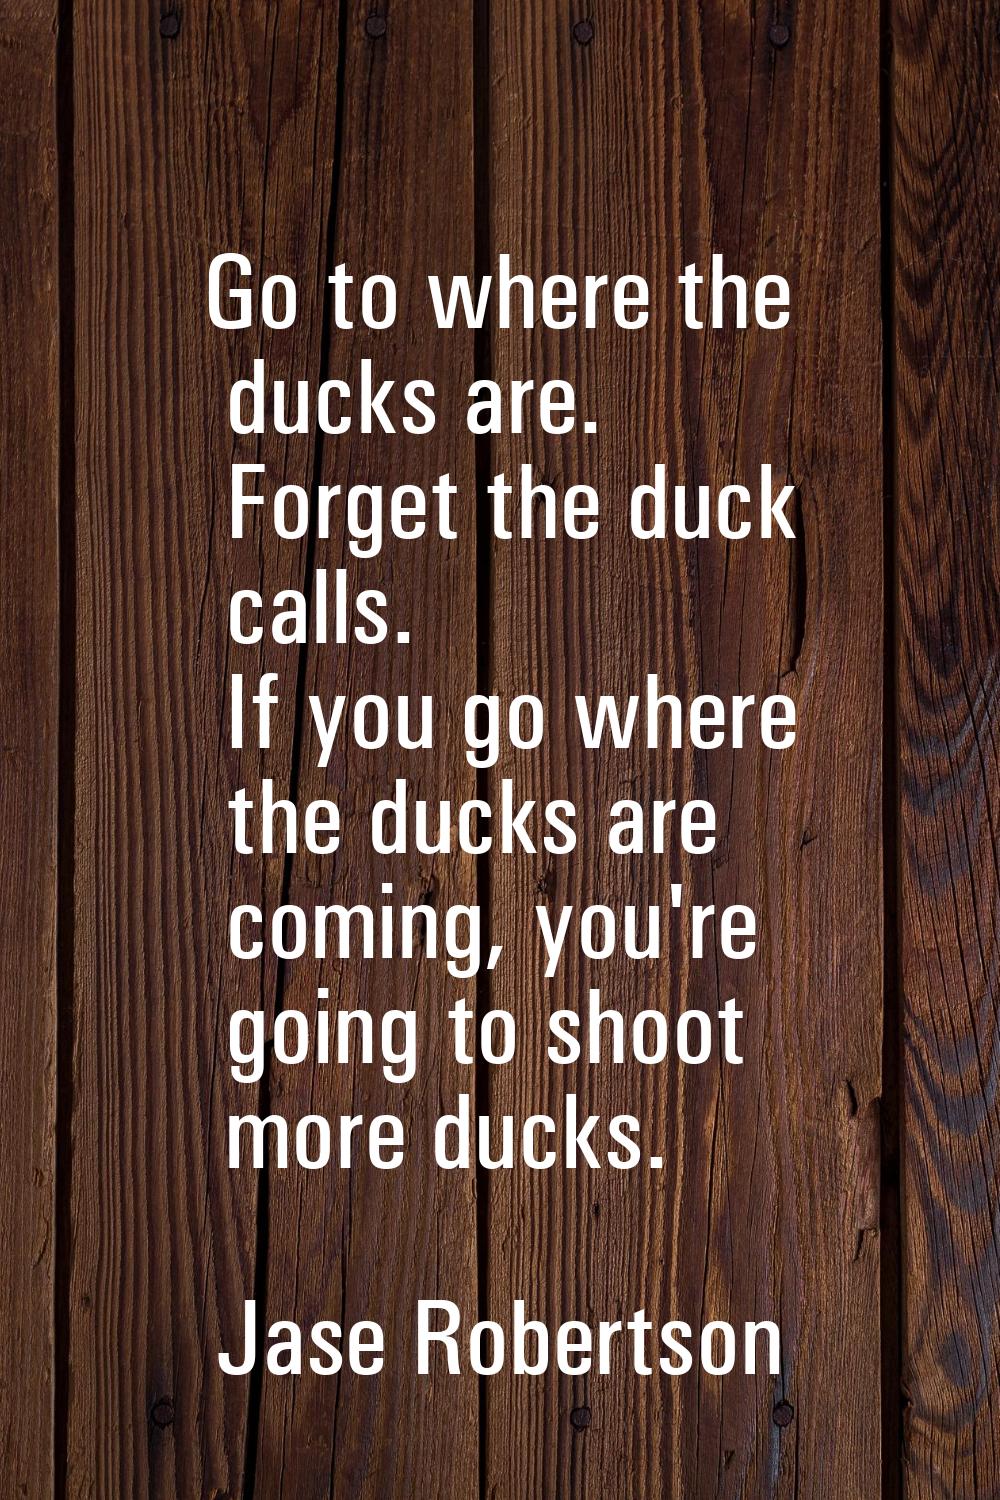 Go to where the ducks are. Forget the duck calls. If you go where the ducks are coming, you're goin